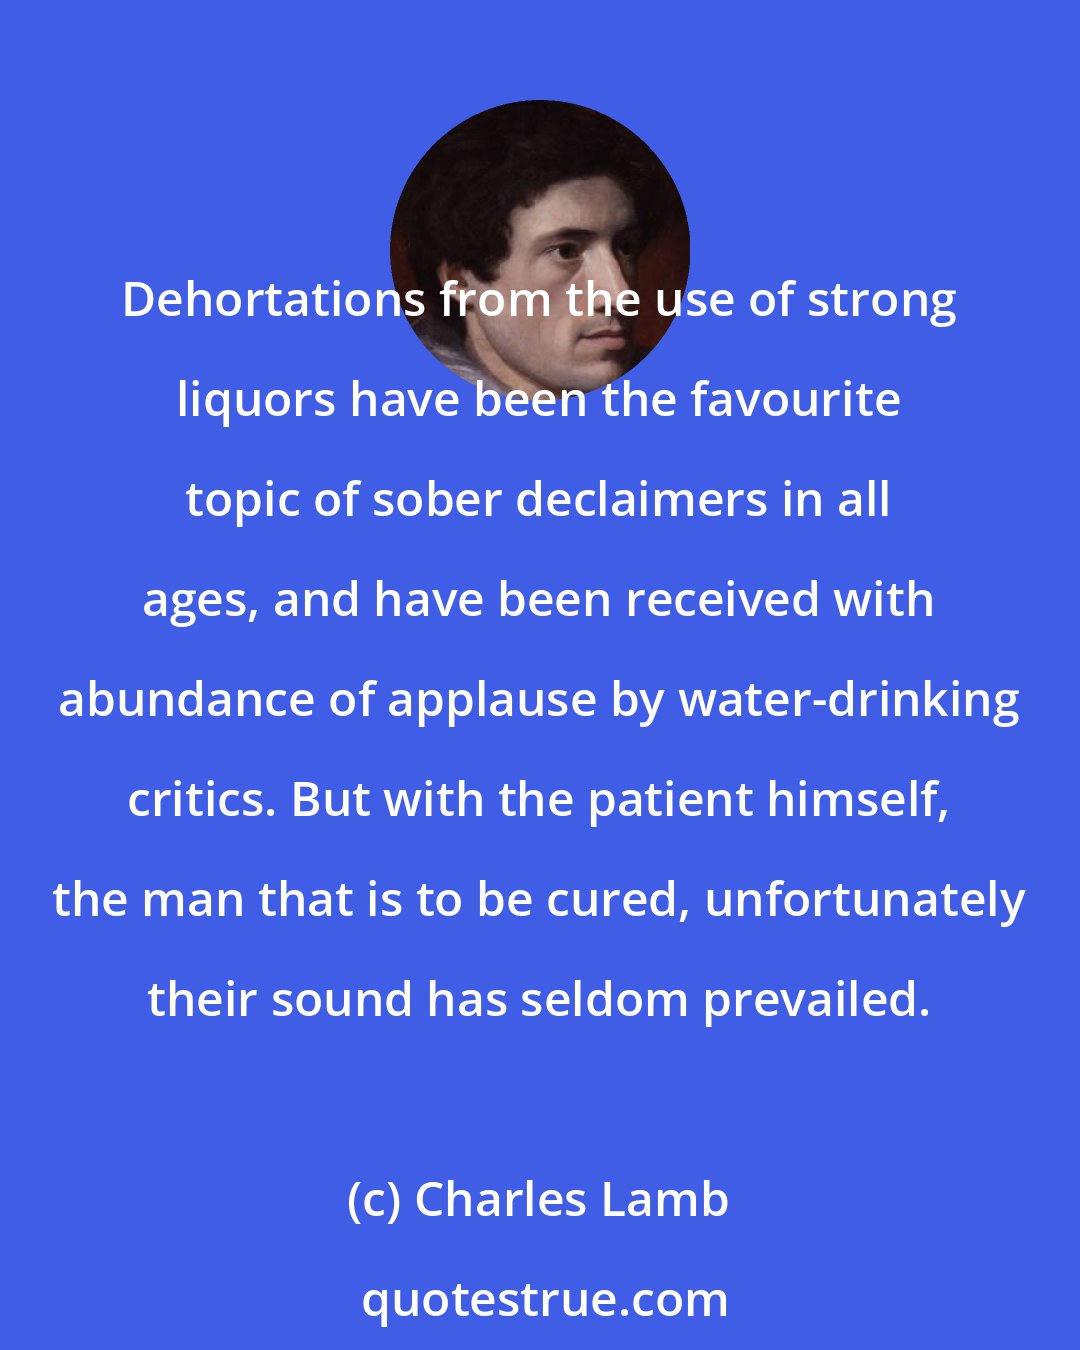 Charles Lamb: Dehortations from the use of strong liquors have been the favourite topic of sober declaimers in all ages, and have been received with abundance of applause by water-drinking critics. But with the patient himself, the man that is to be cured, unfortunately their sound has seldom prevailed.